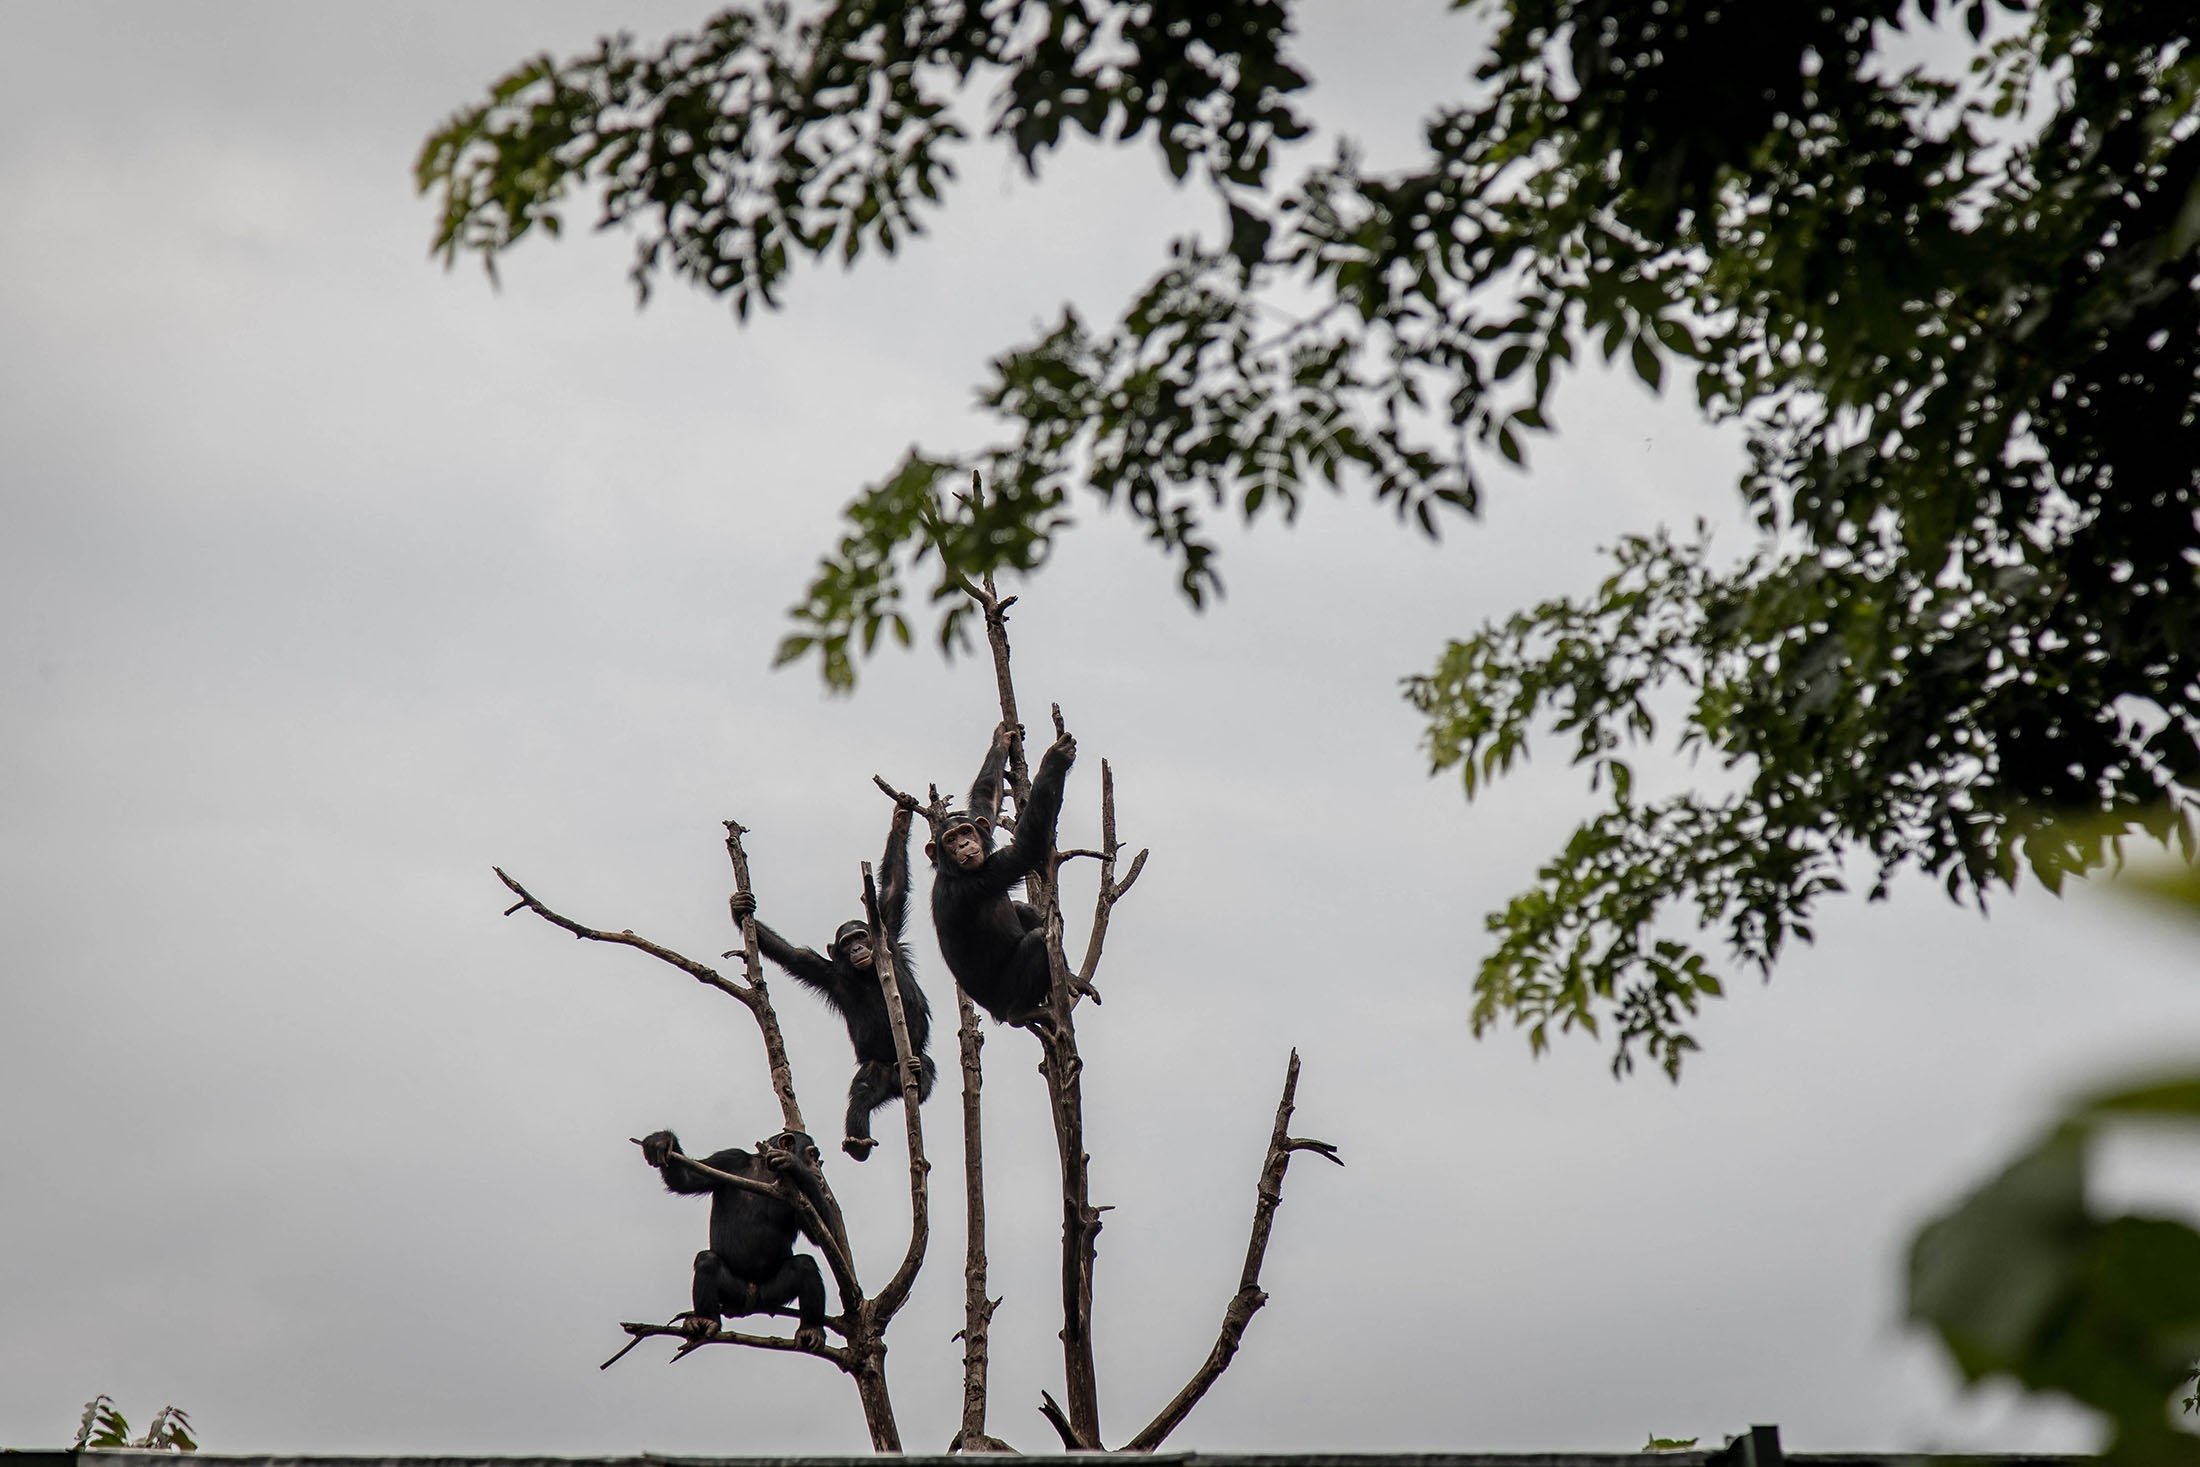 Chimpanzees are seen playing in the trees at the Lwiro Primate Rehabilitation Center, in Lwiro, eastern Democratic Republic of Congo, Feb. 14, 2022. (AFP Photo)